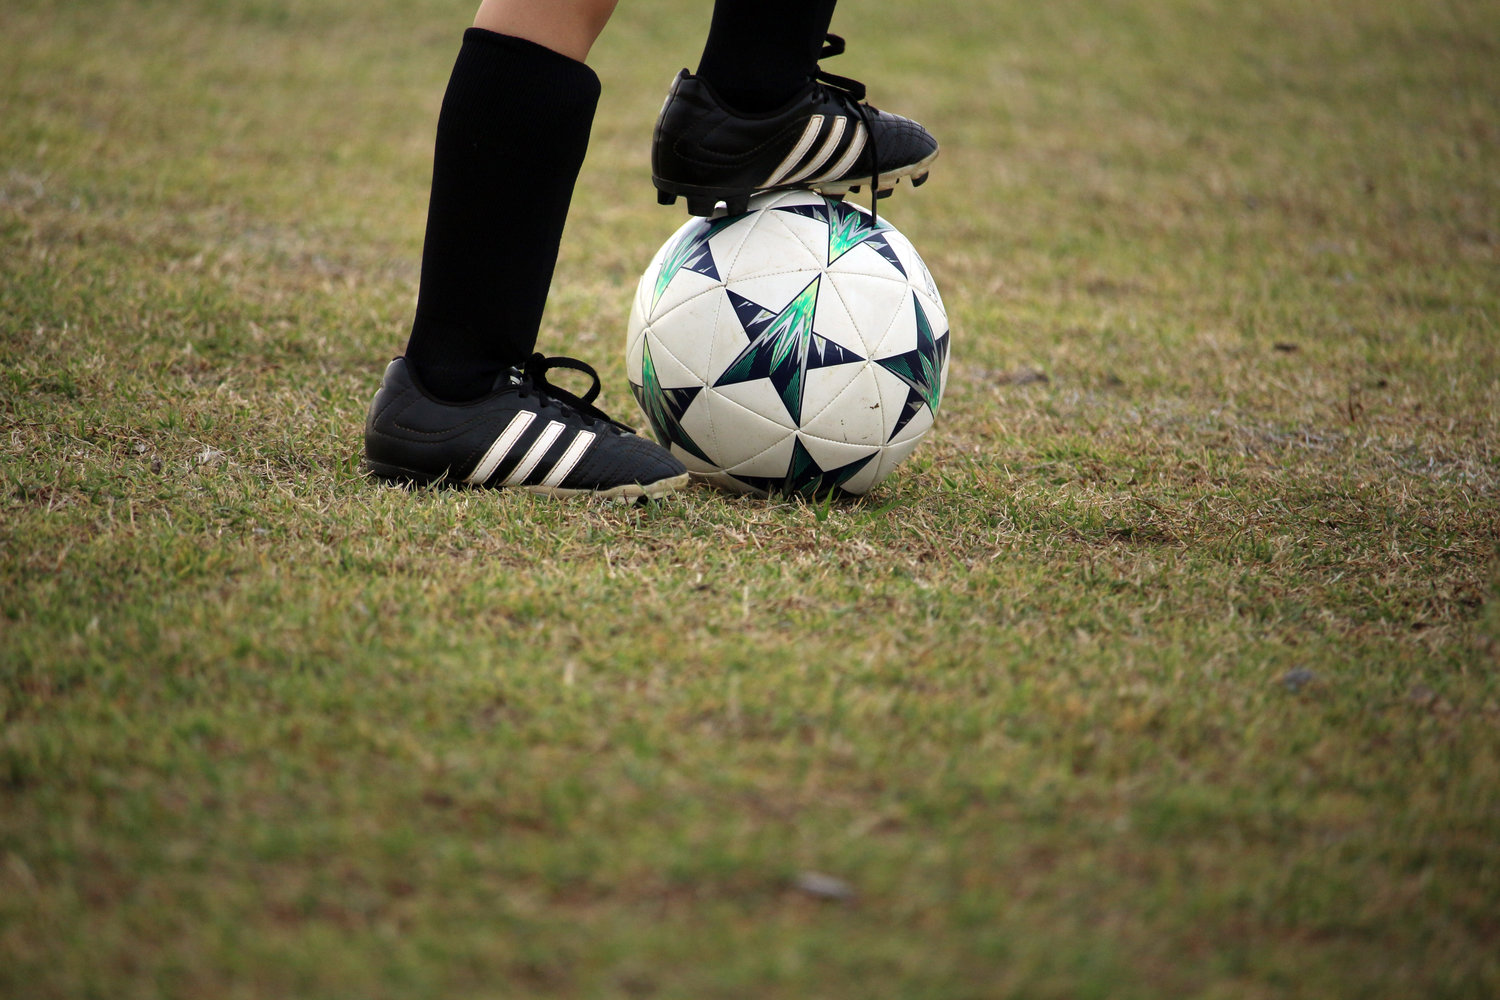 Adapting to Virtual Youth Soccer